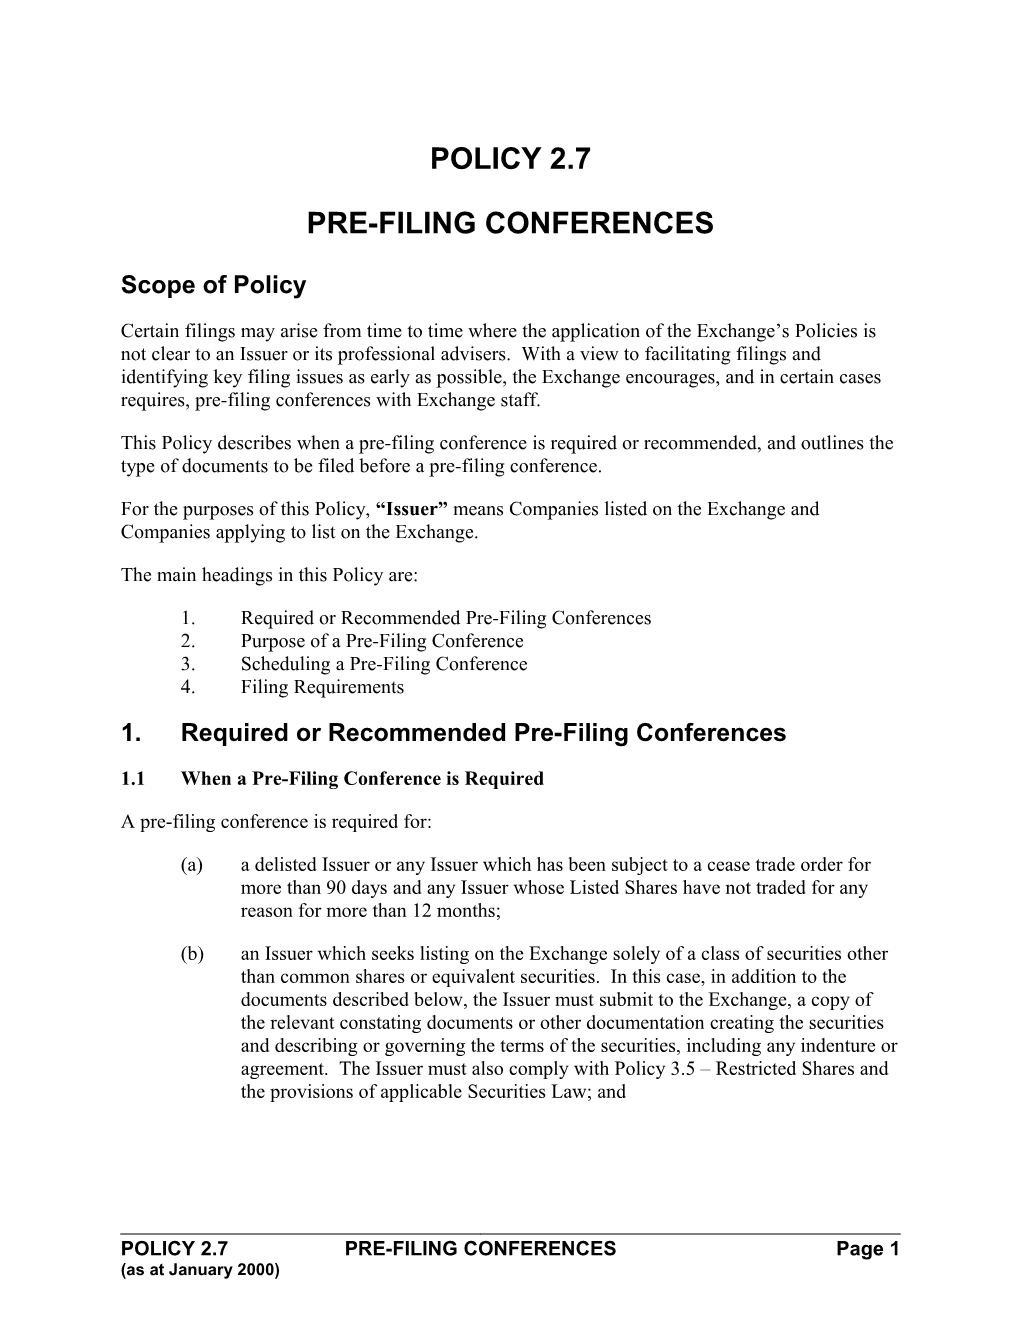 Policy XX PRE-FILING CONFERENCES